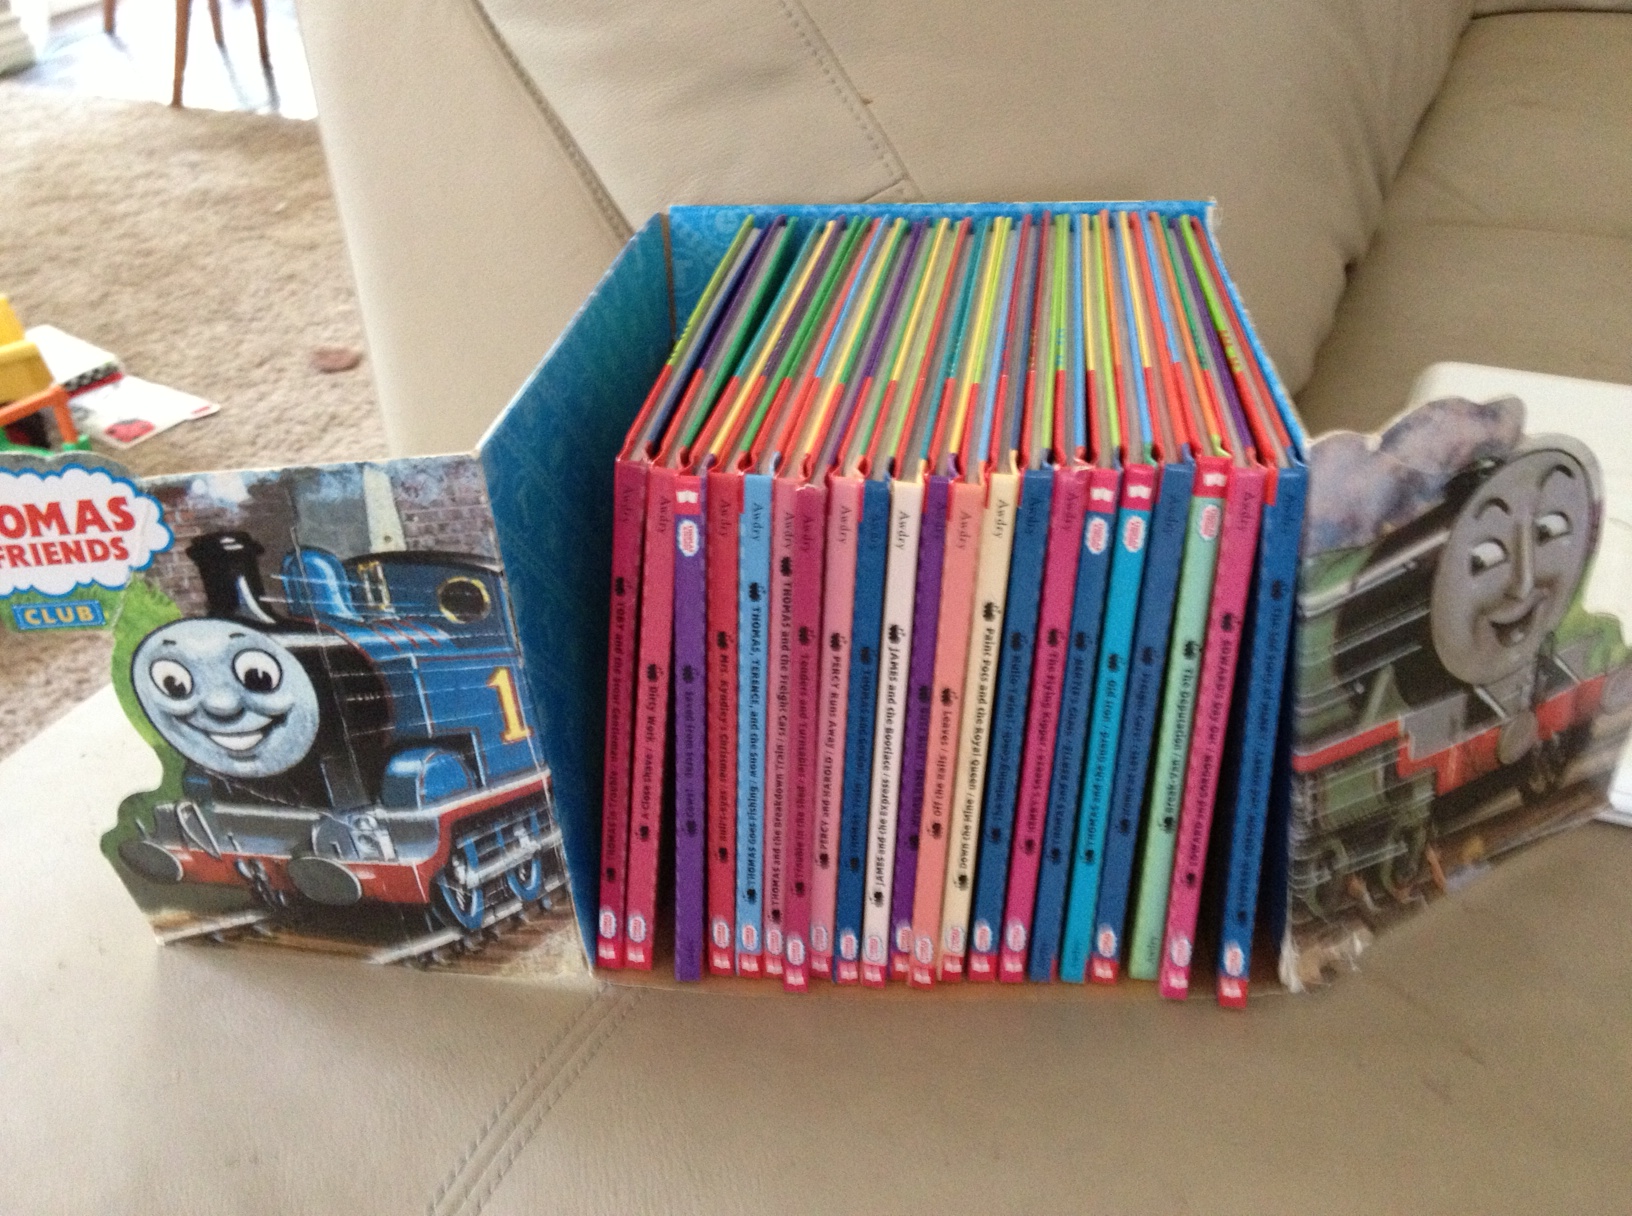 Best deal of the day-- a set of vintage Thomas the Tank Engine books!